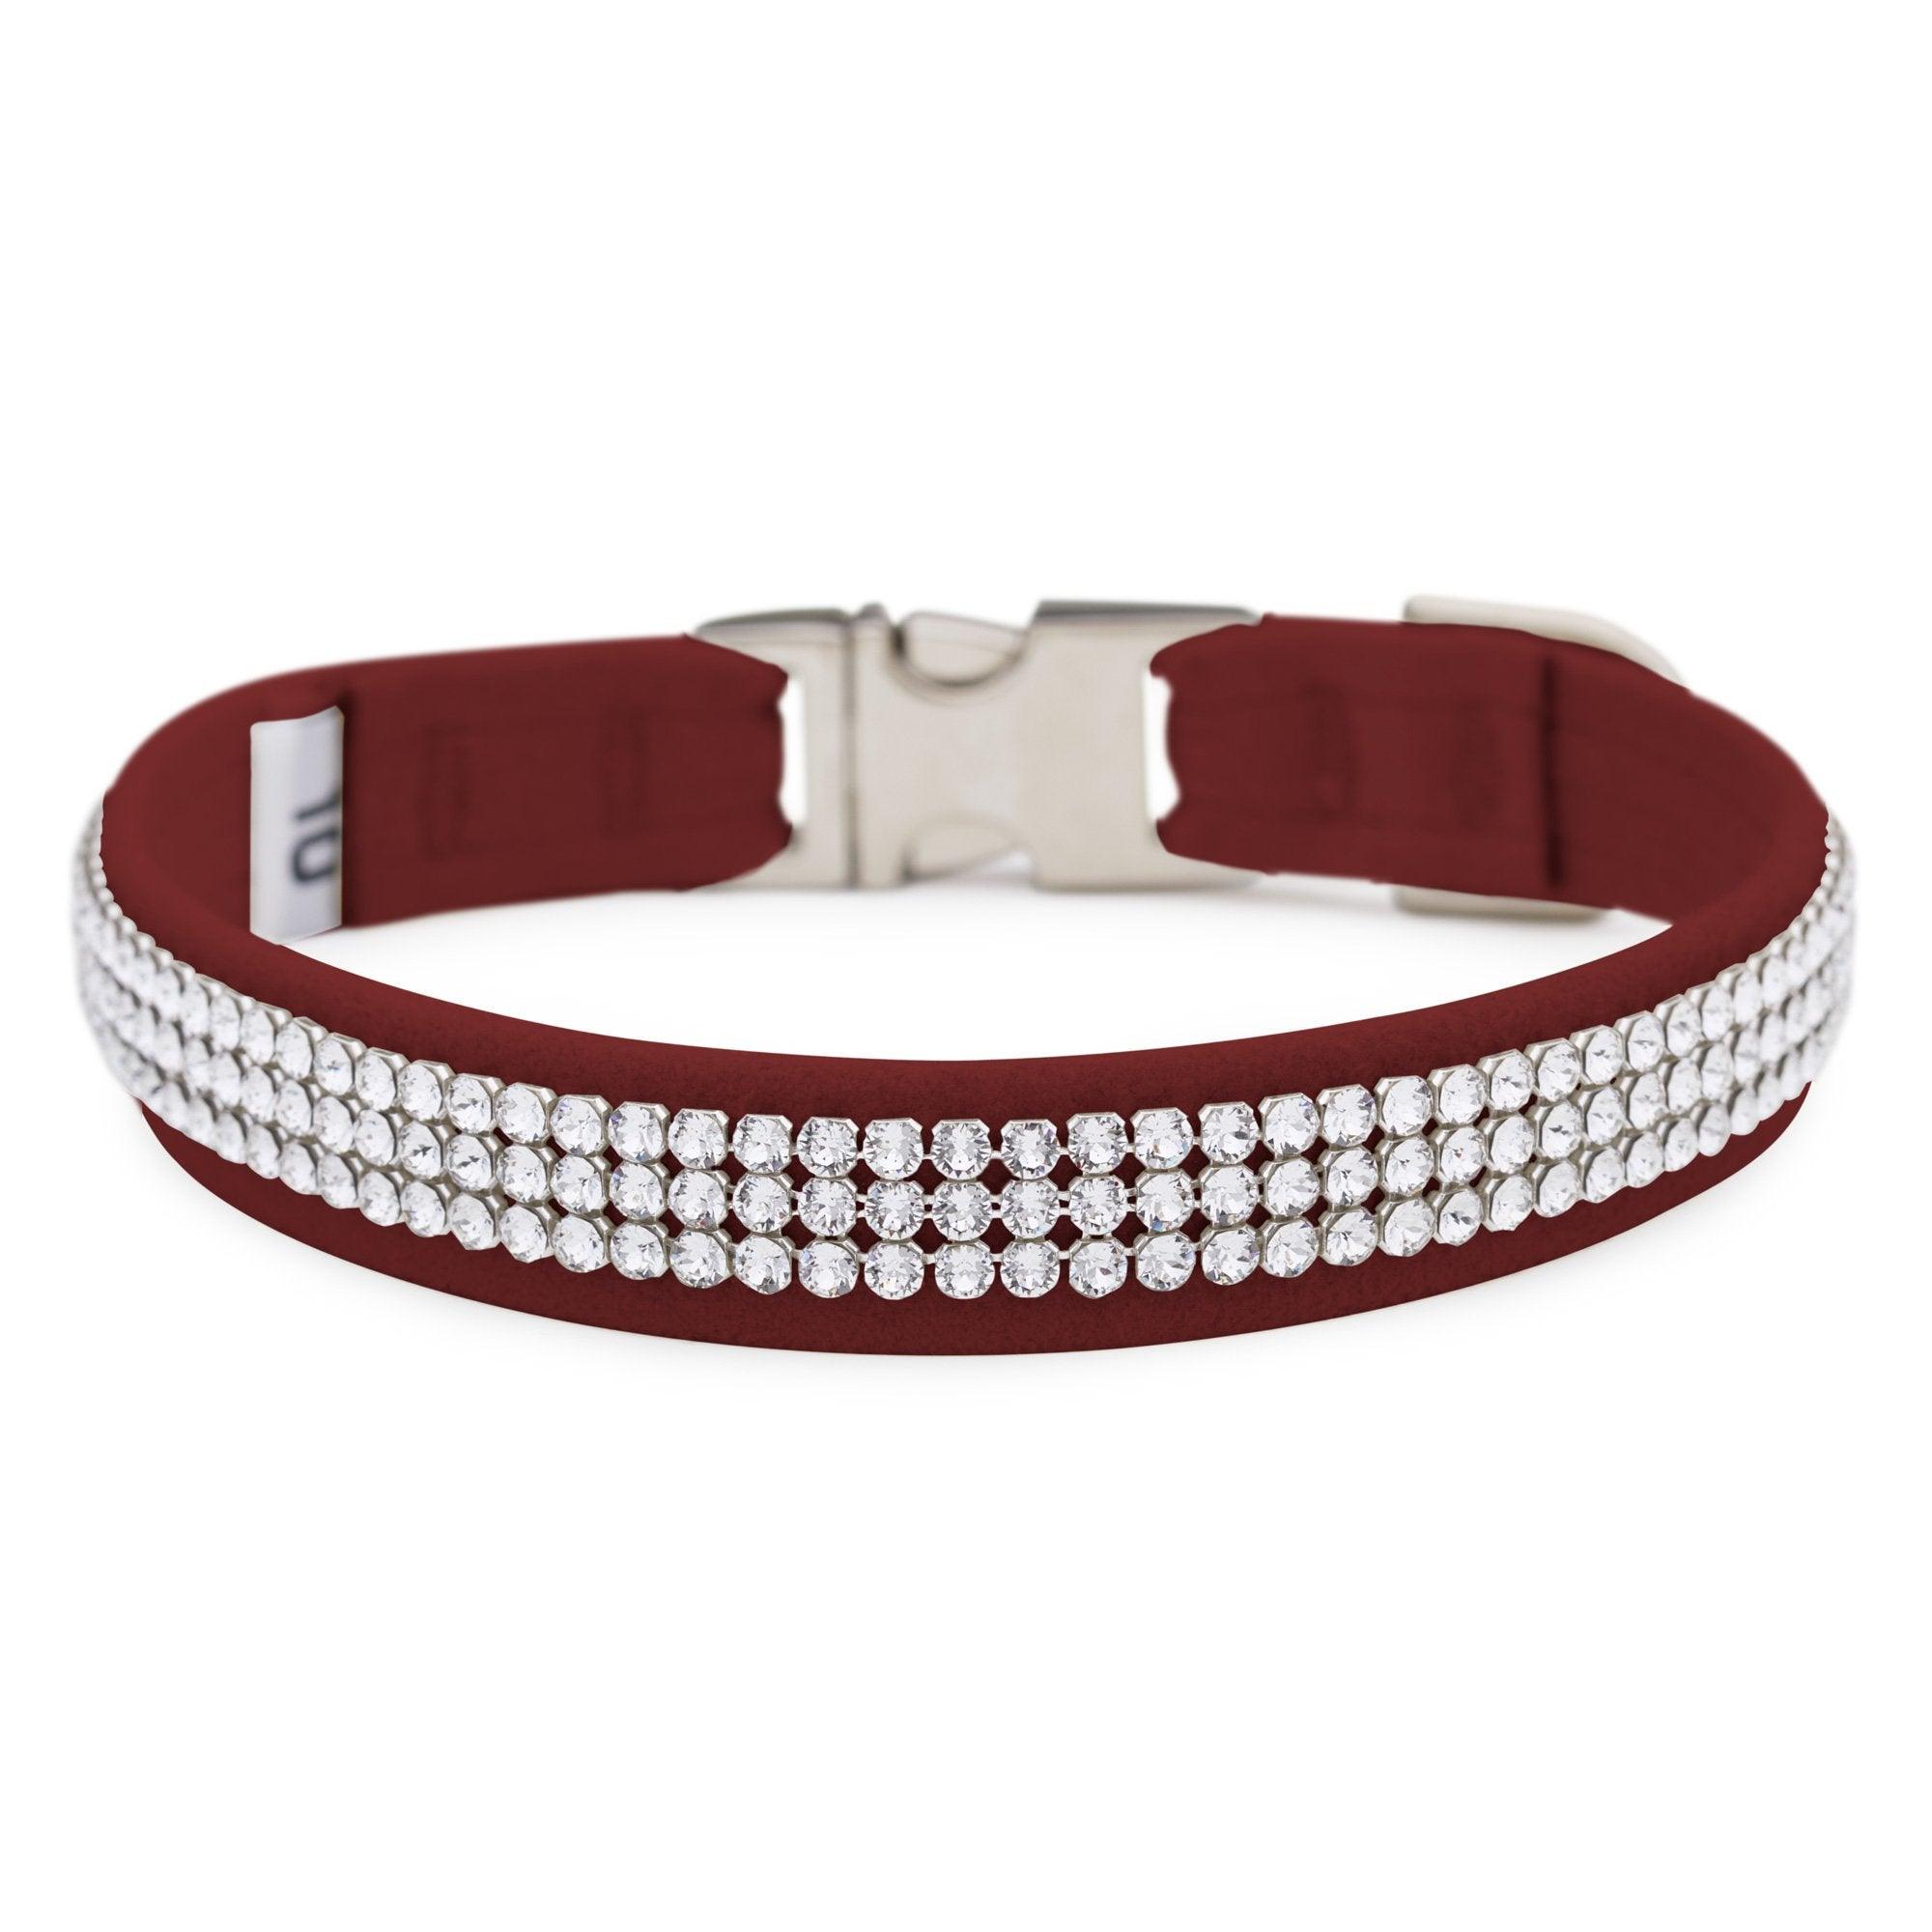 Burgundy 3 Row Giltmore Perfect Fit Collar - Rocky & Maggie's Pet Boutique and Salon